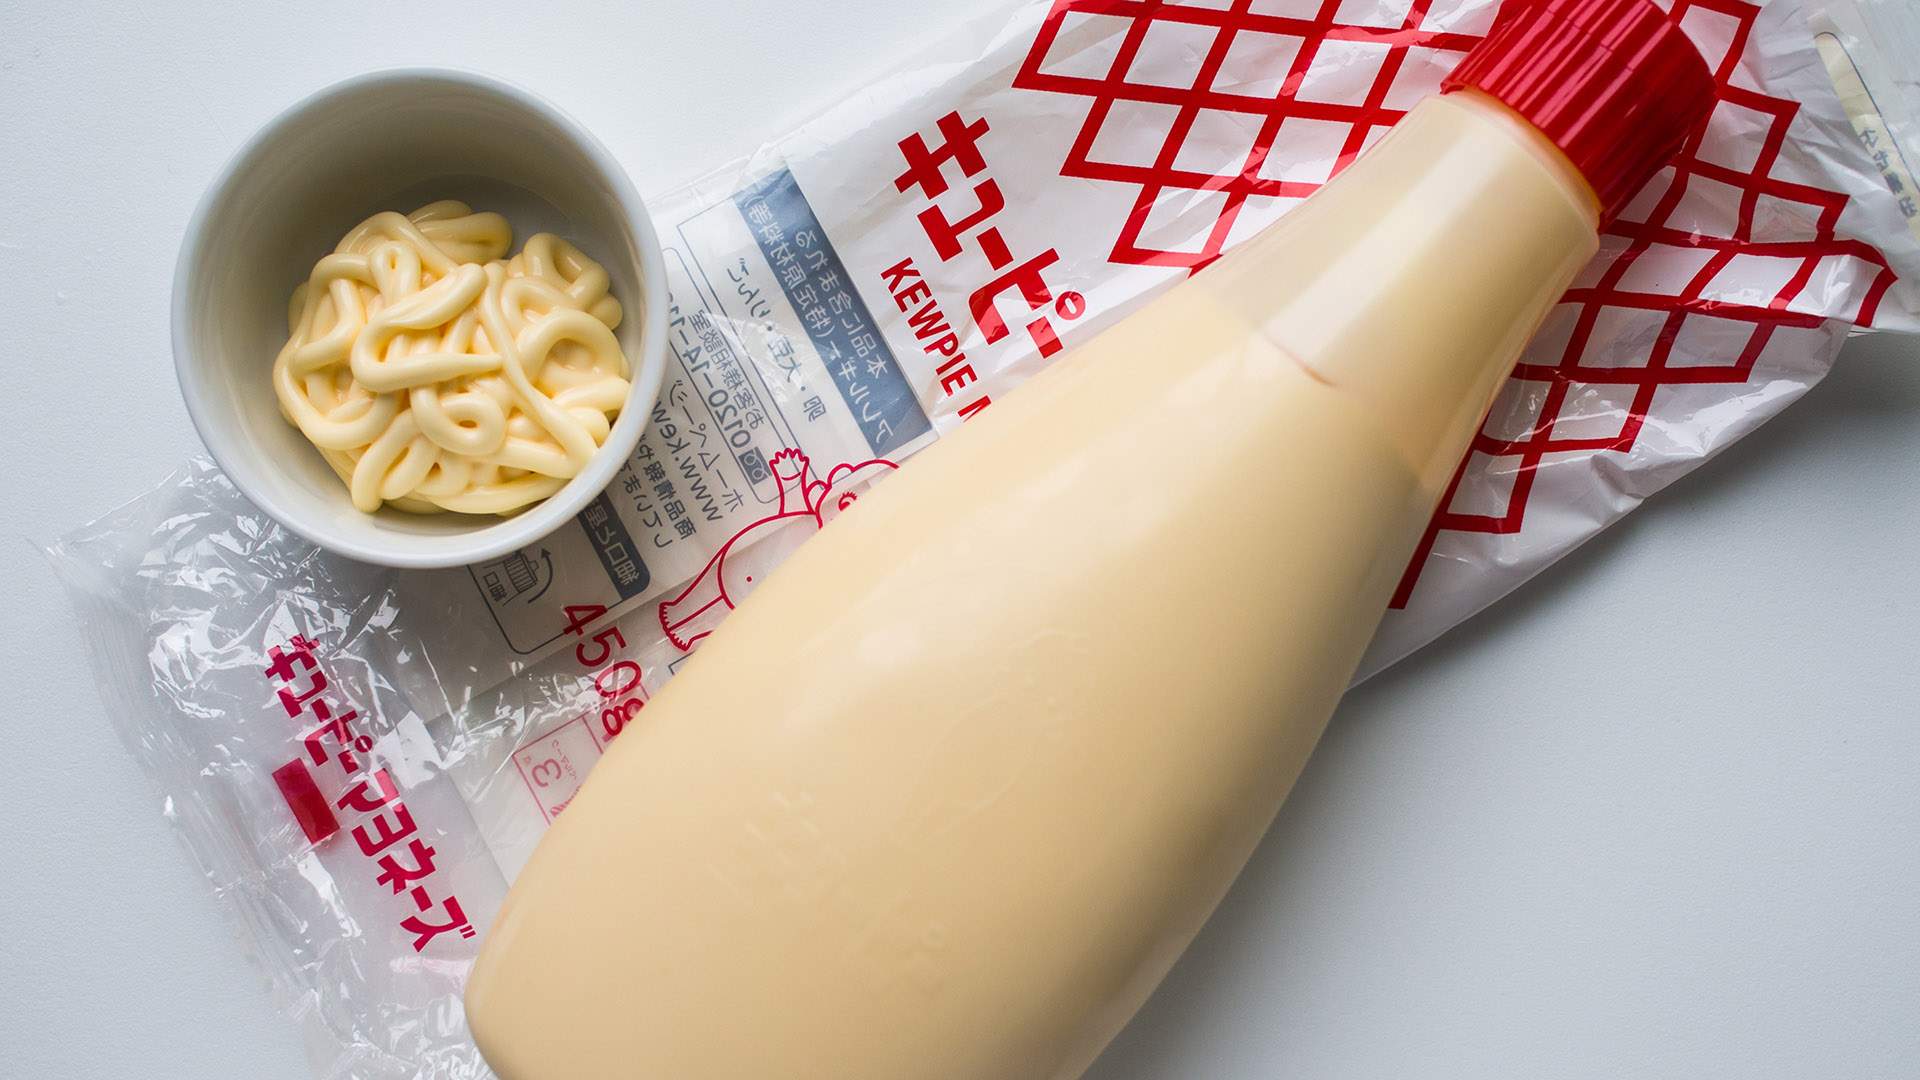 Mayonnaise Cafes are Japan's Latest Food Trend